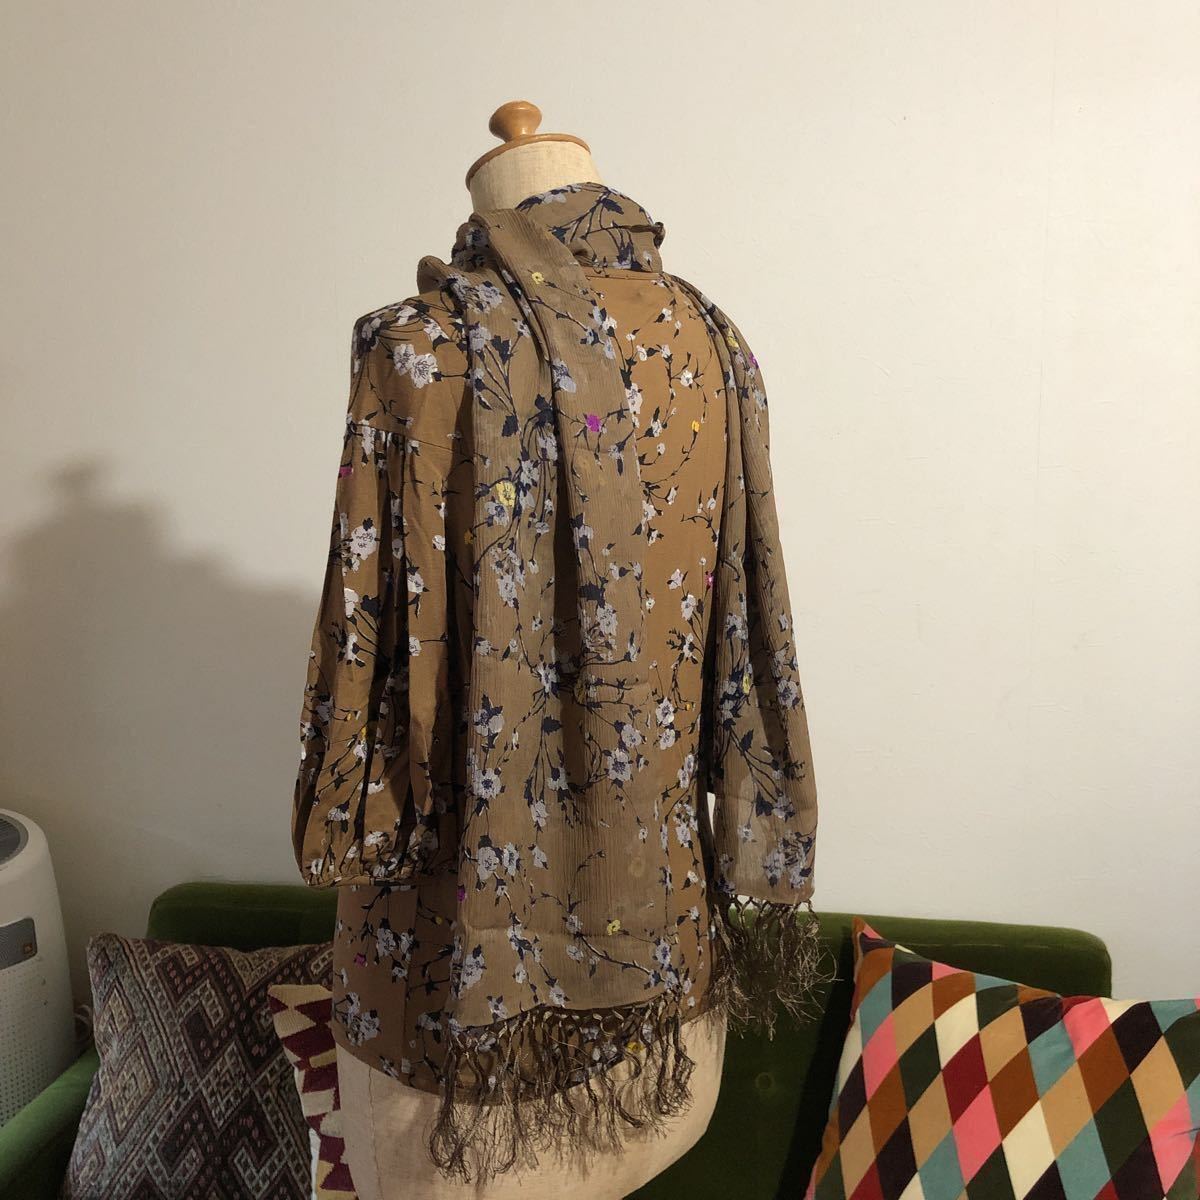  new goods Paul Smith BLACK Paul Smith black cut and sewn & long stole silk 100 Camel stylish adult clothes party formal 